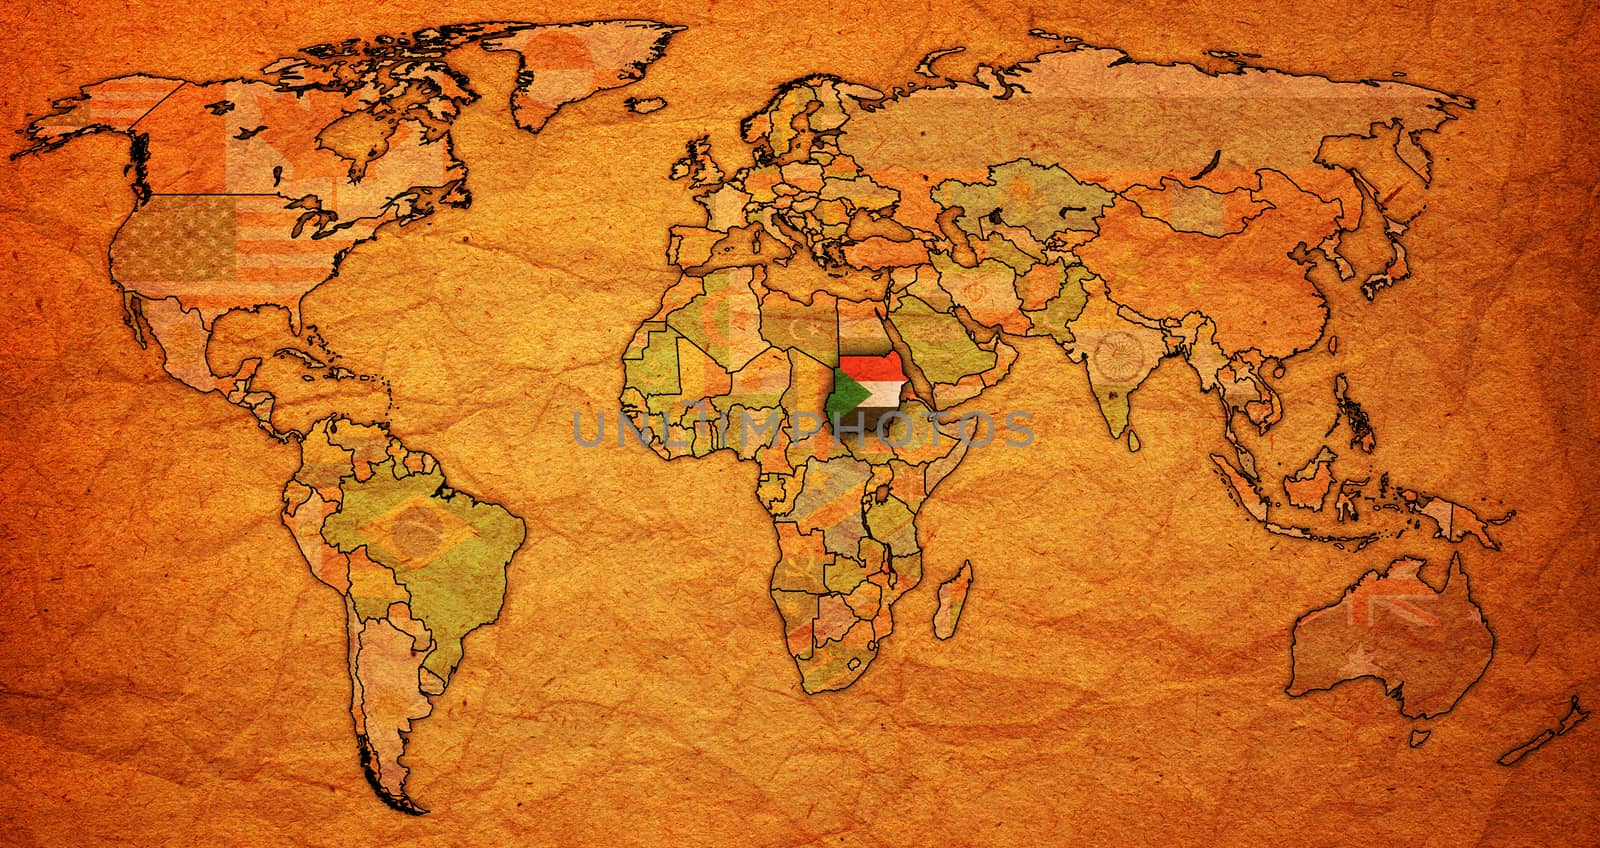 sudan flag on old vintage world map with national borders